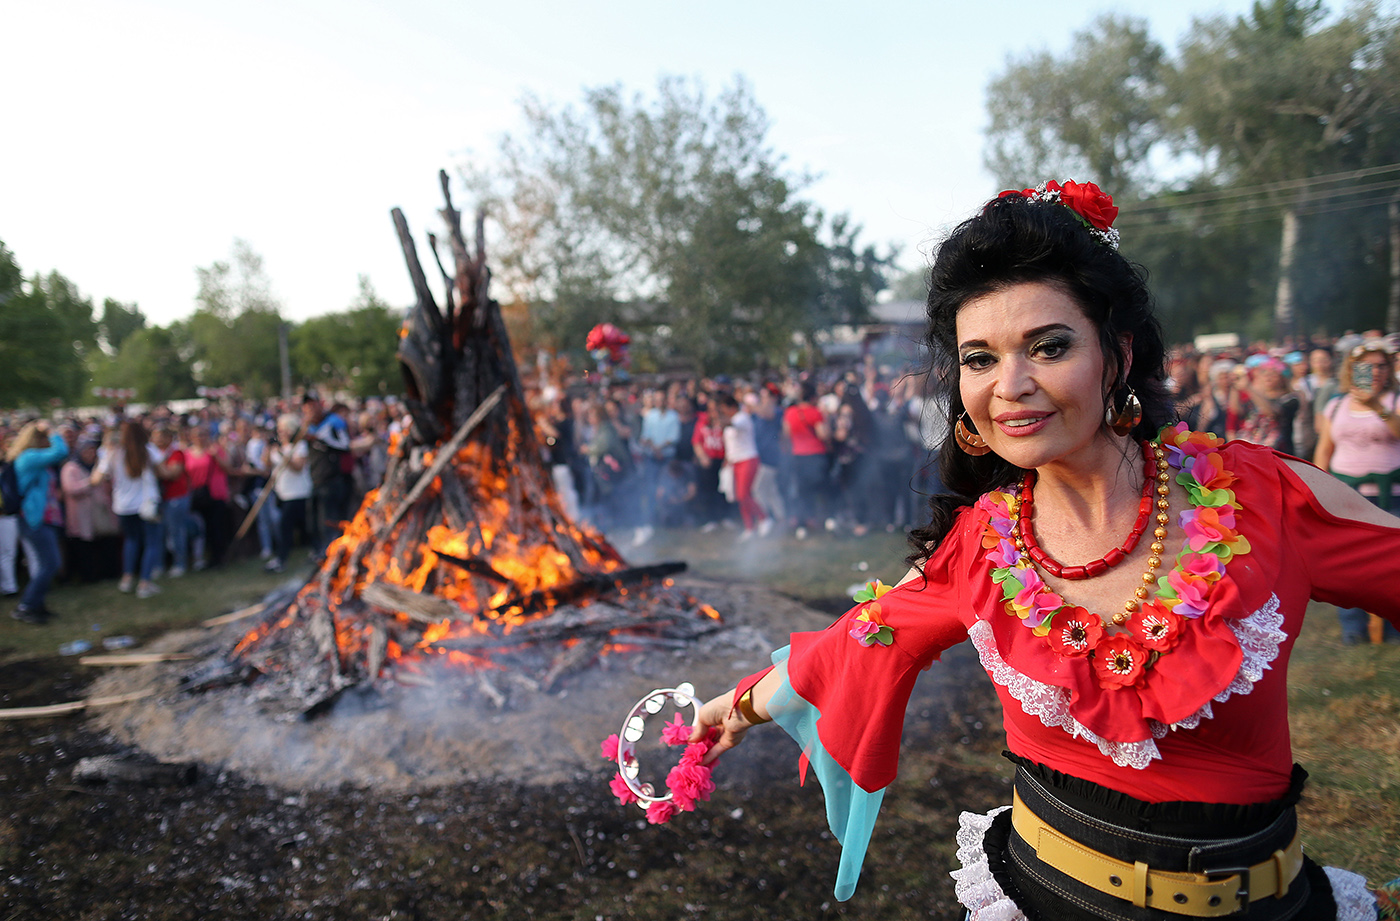 People dance around a huge fire during the Kakava festival in Edirne, Turkey, 05 May 2018. Kakava festival takes place to celebrate the arrival of spring by gypsies living in Turkey on 05 to 06 May each year. The fire is burned, danced around, skipped over. At the end of the day, wishes are written to a paper and left on the river.